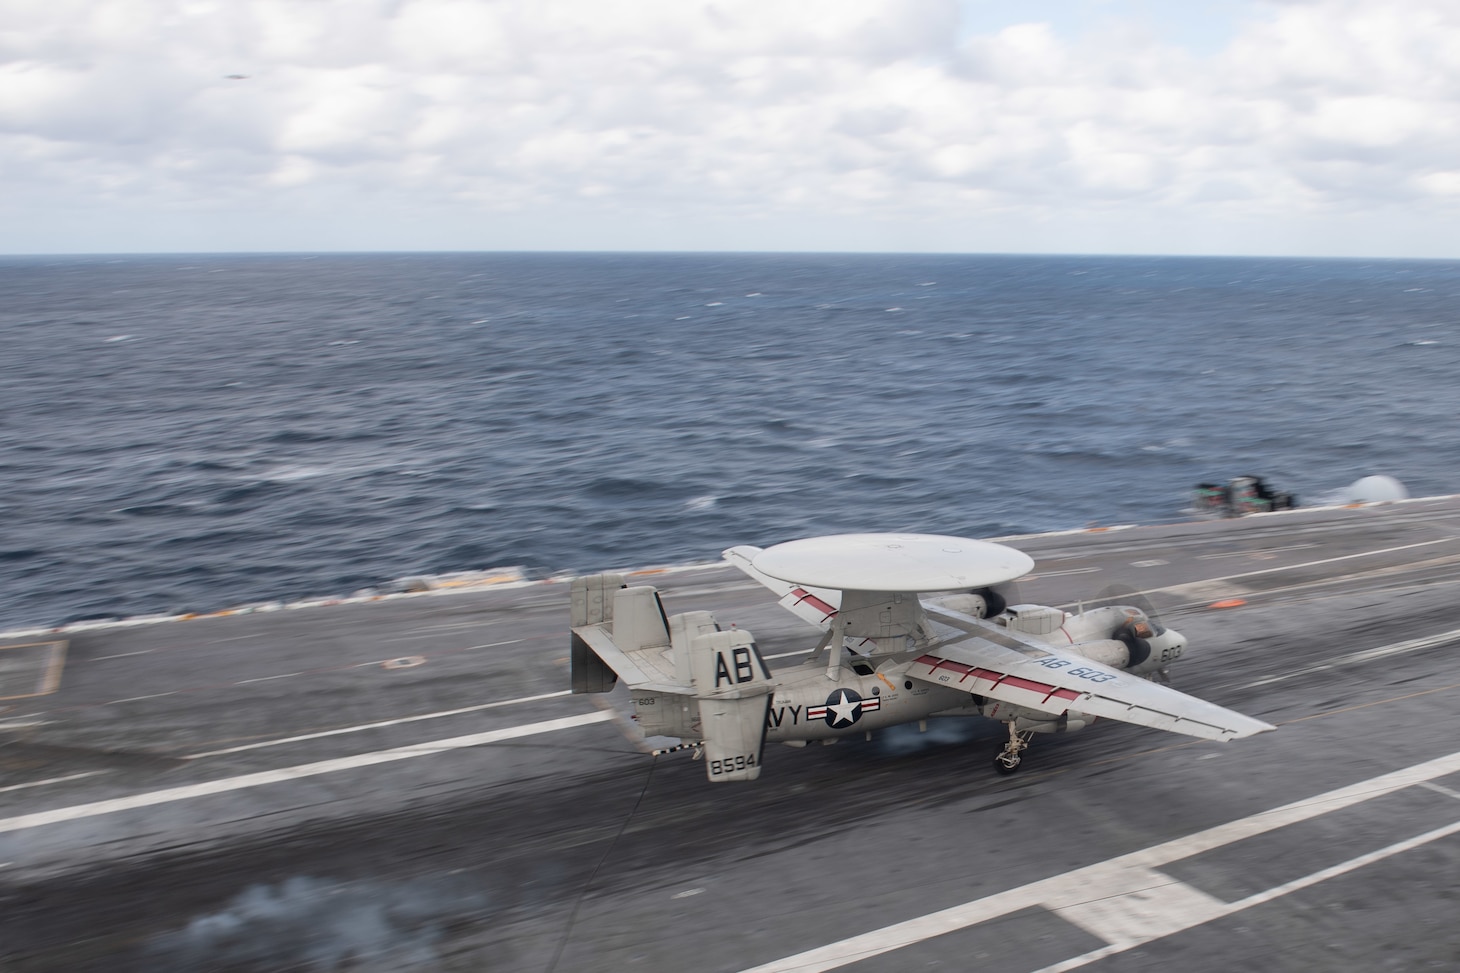 An E-2C Hawkeye, assigned to Carrier Airborne Early Warning Squadron (VAW) 126, lands on the flight deck of the aircraft carrier USS John C. Stennis (CVN 74).